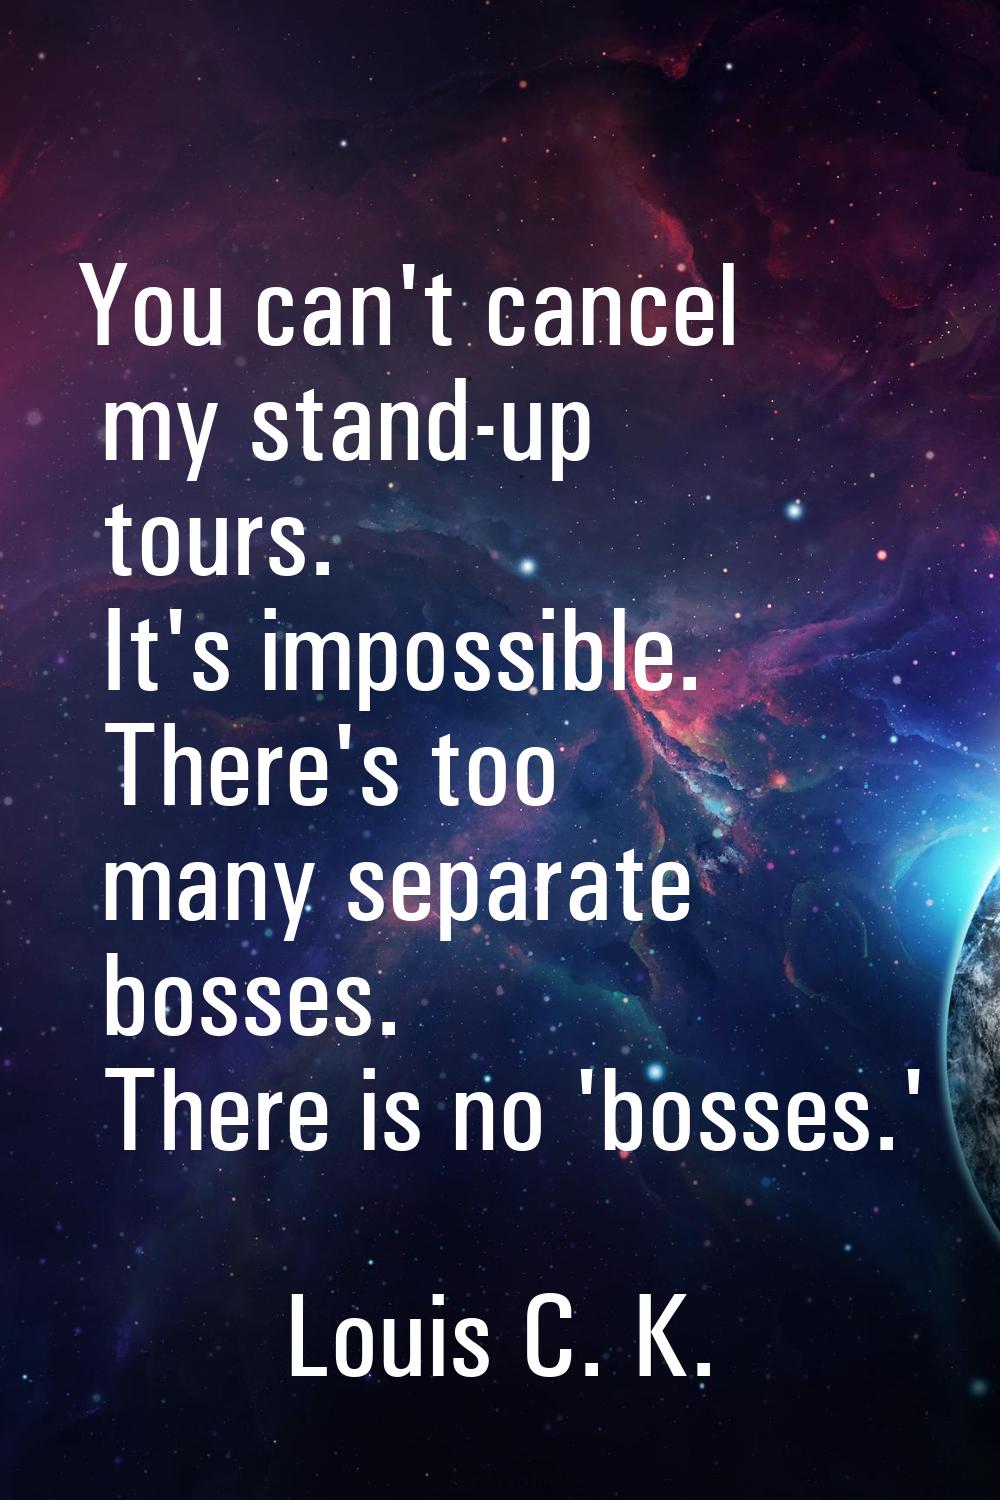 You can't cancel my stand-up tours. It's impossible. There's too many separate bosses. There is no 